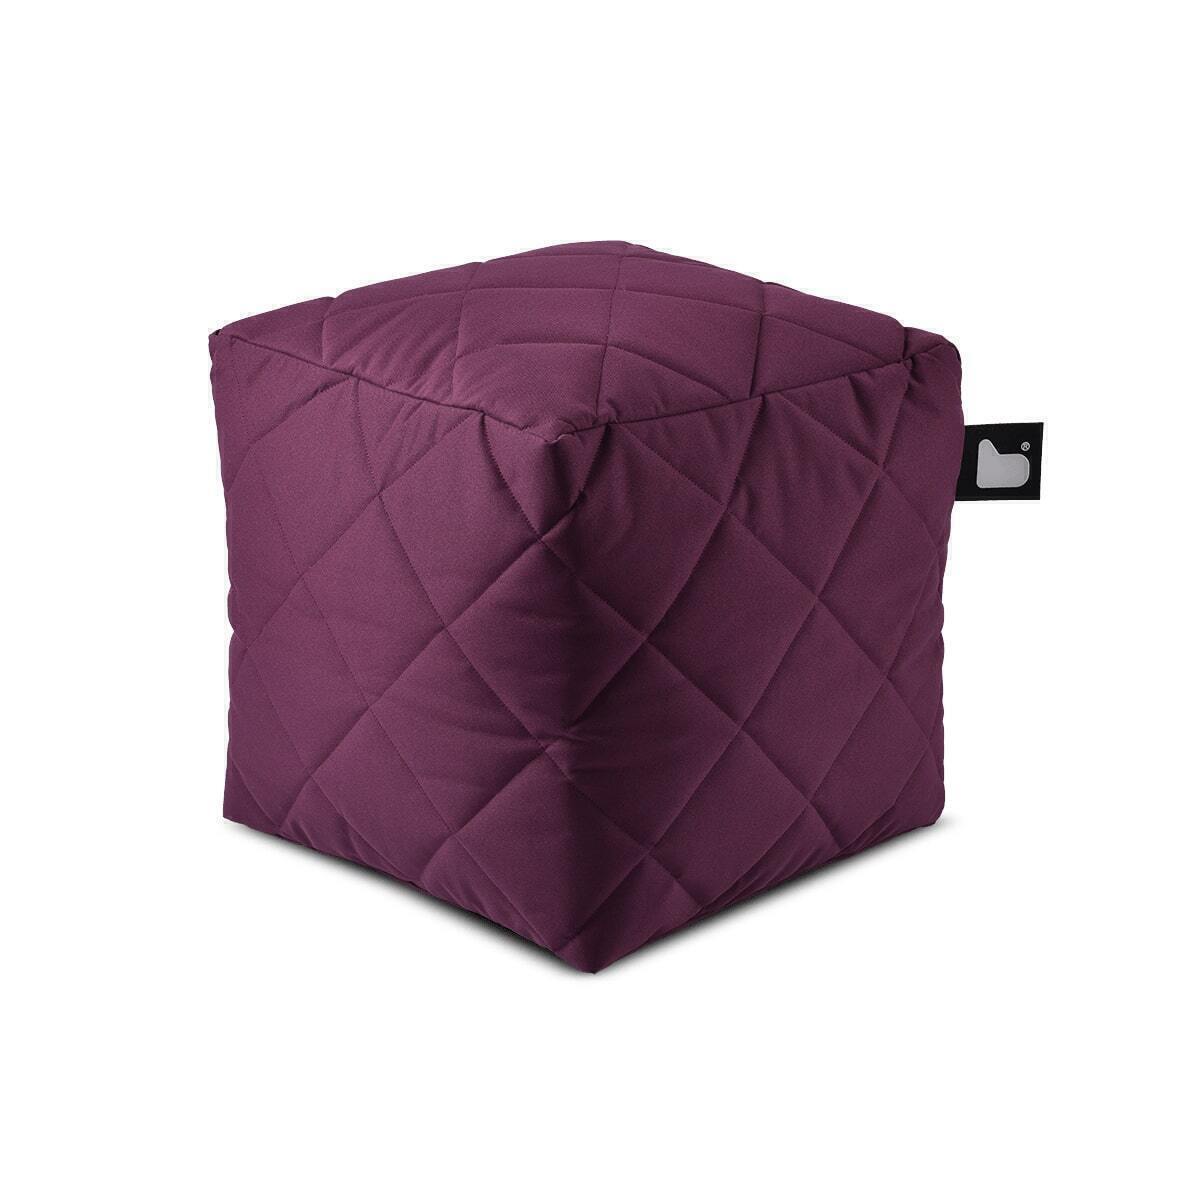 Extreme Lounging - Quilted Bean Box  - Berry product image